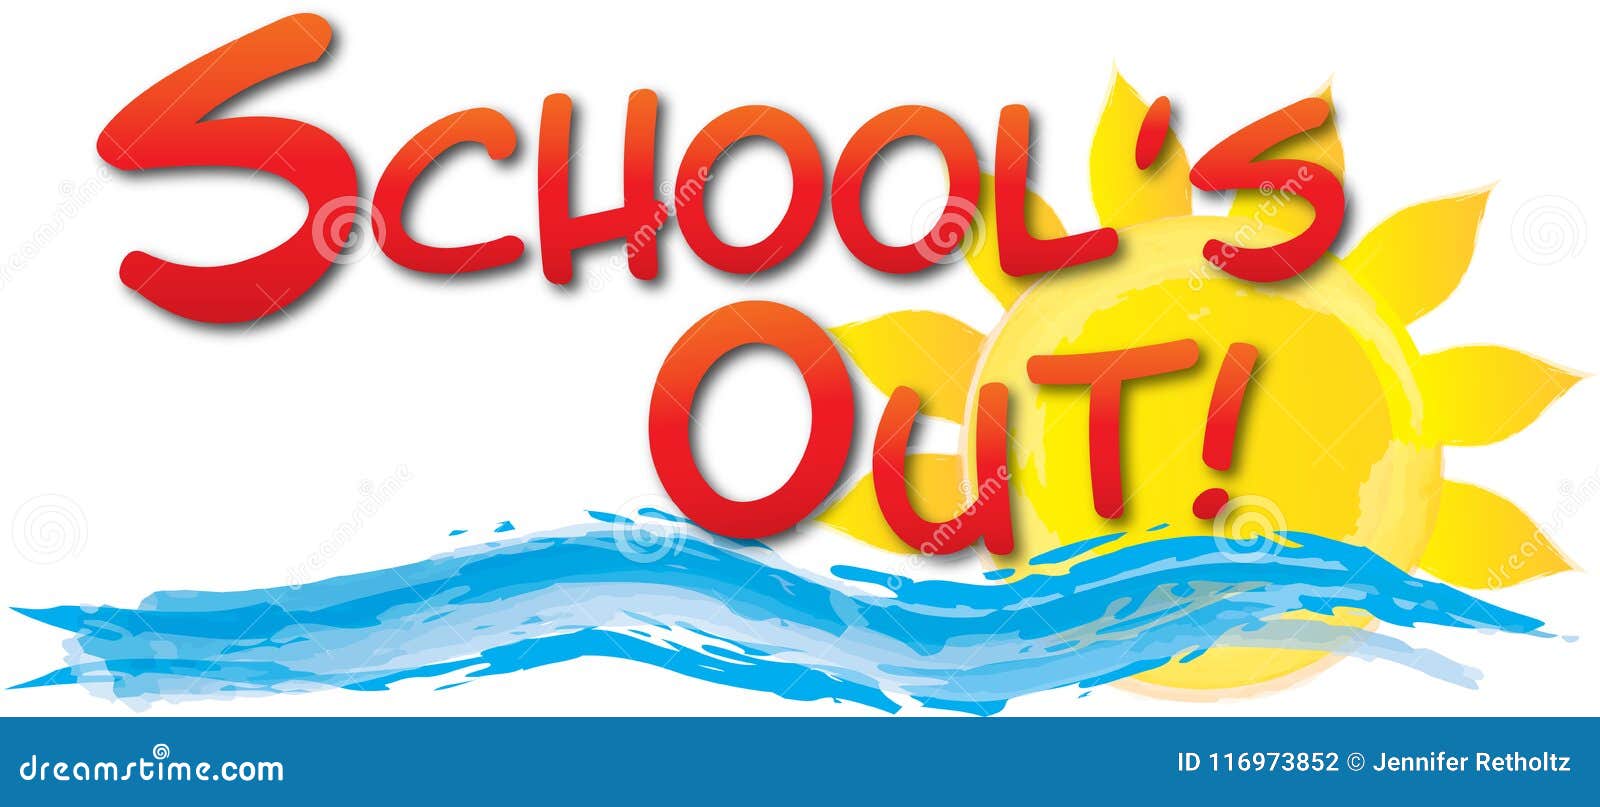 school`s out logo